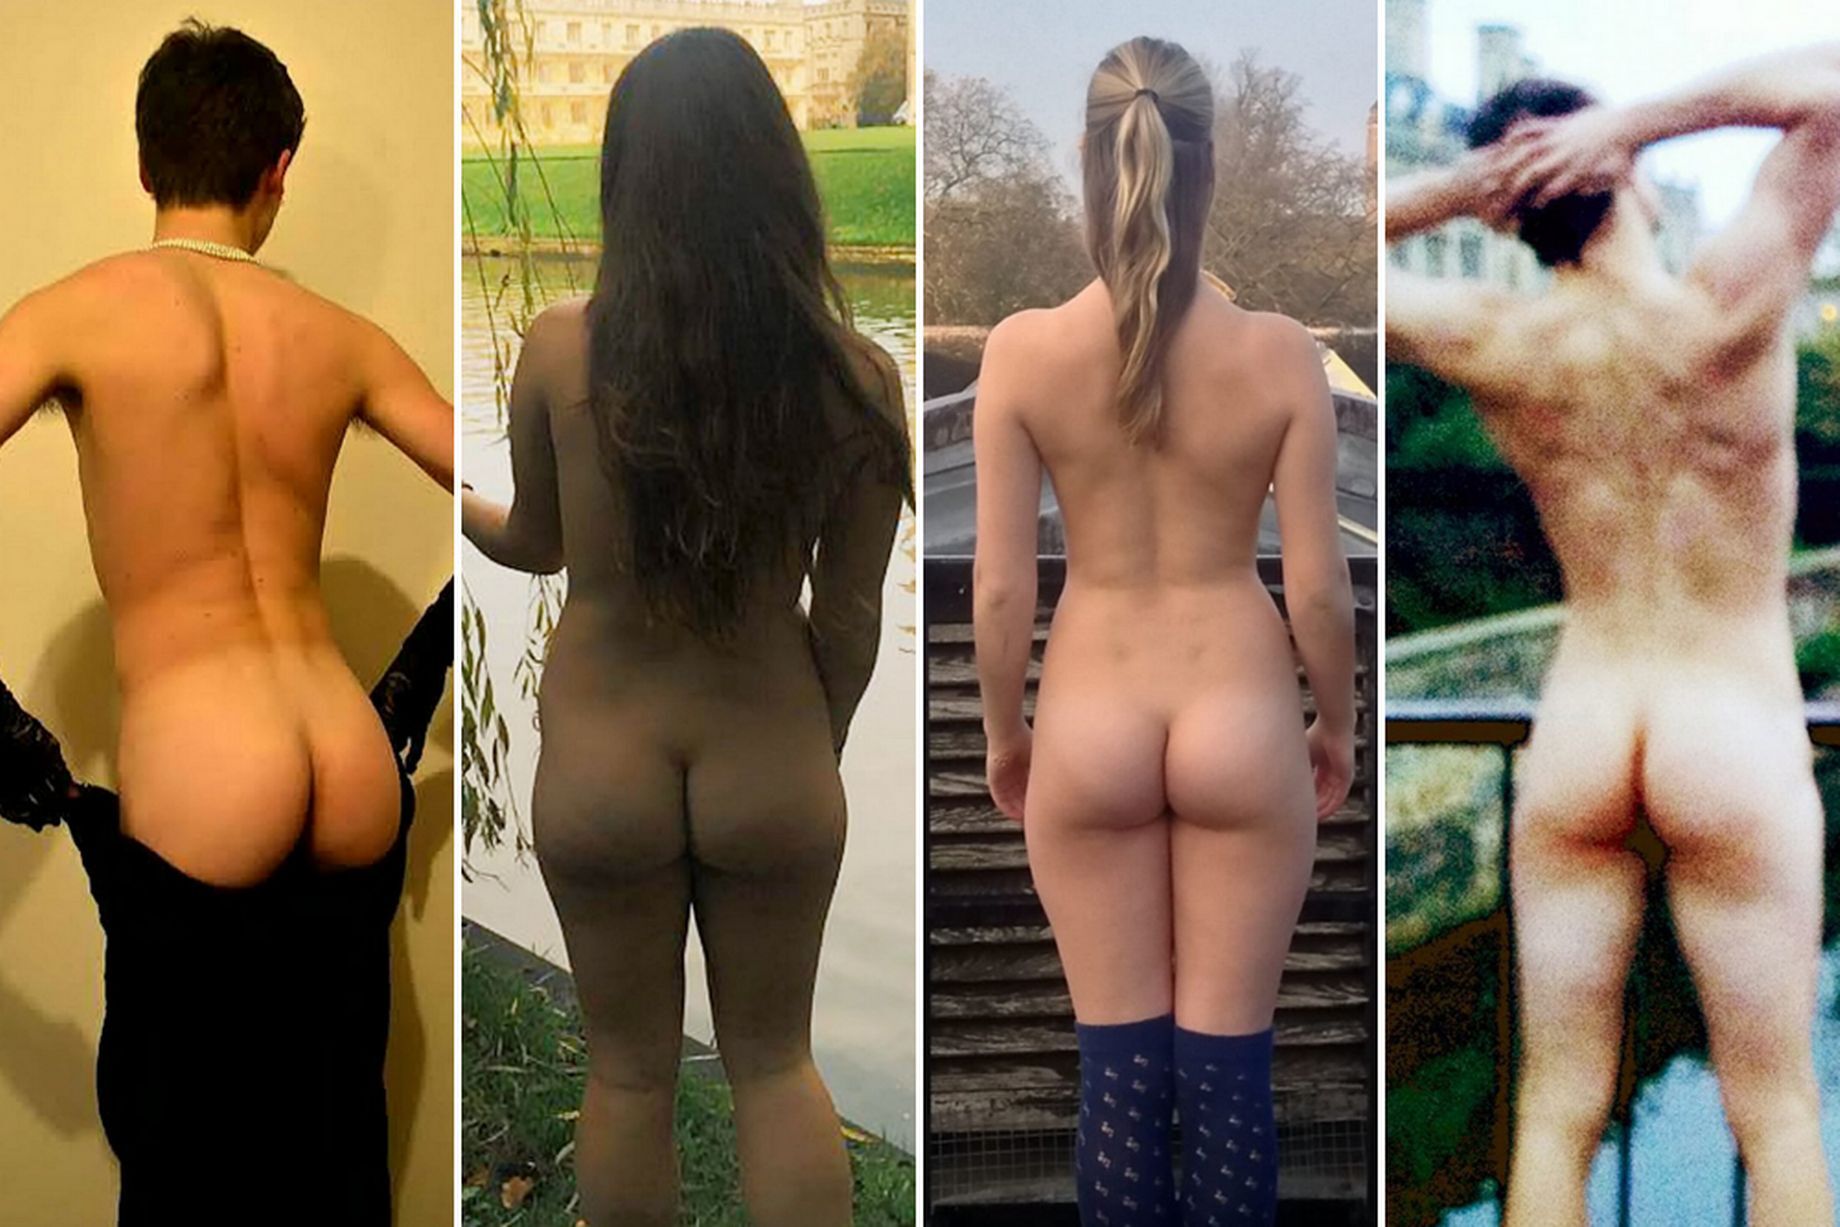 Butt naked: celebrity bare butts you will never forget